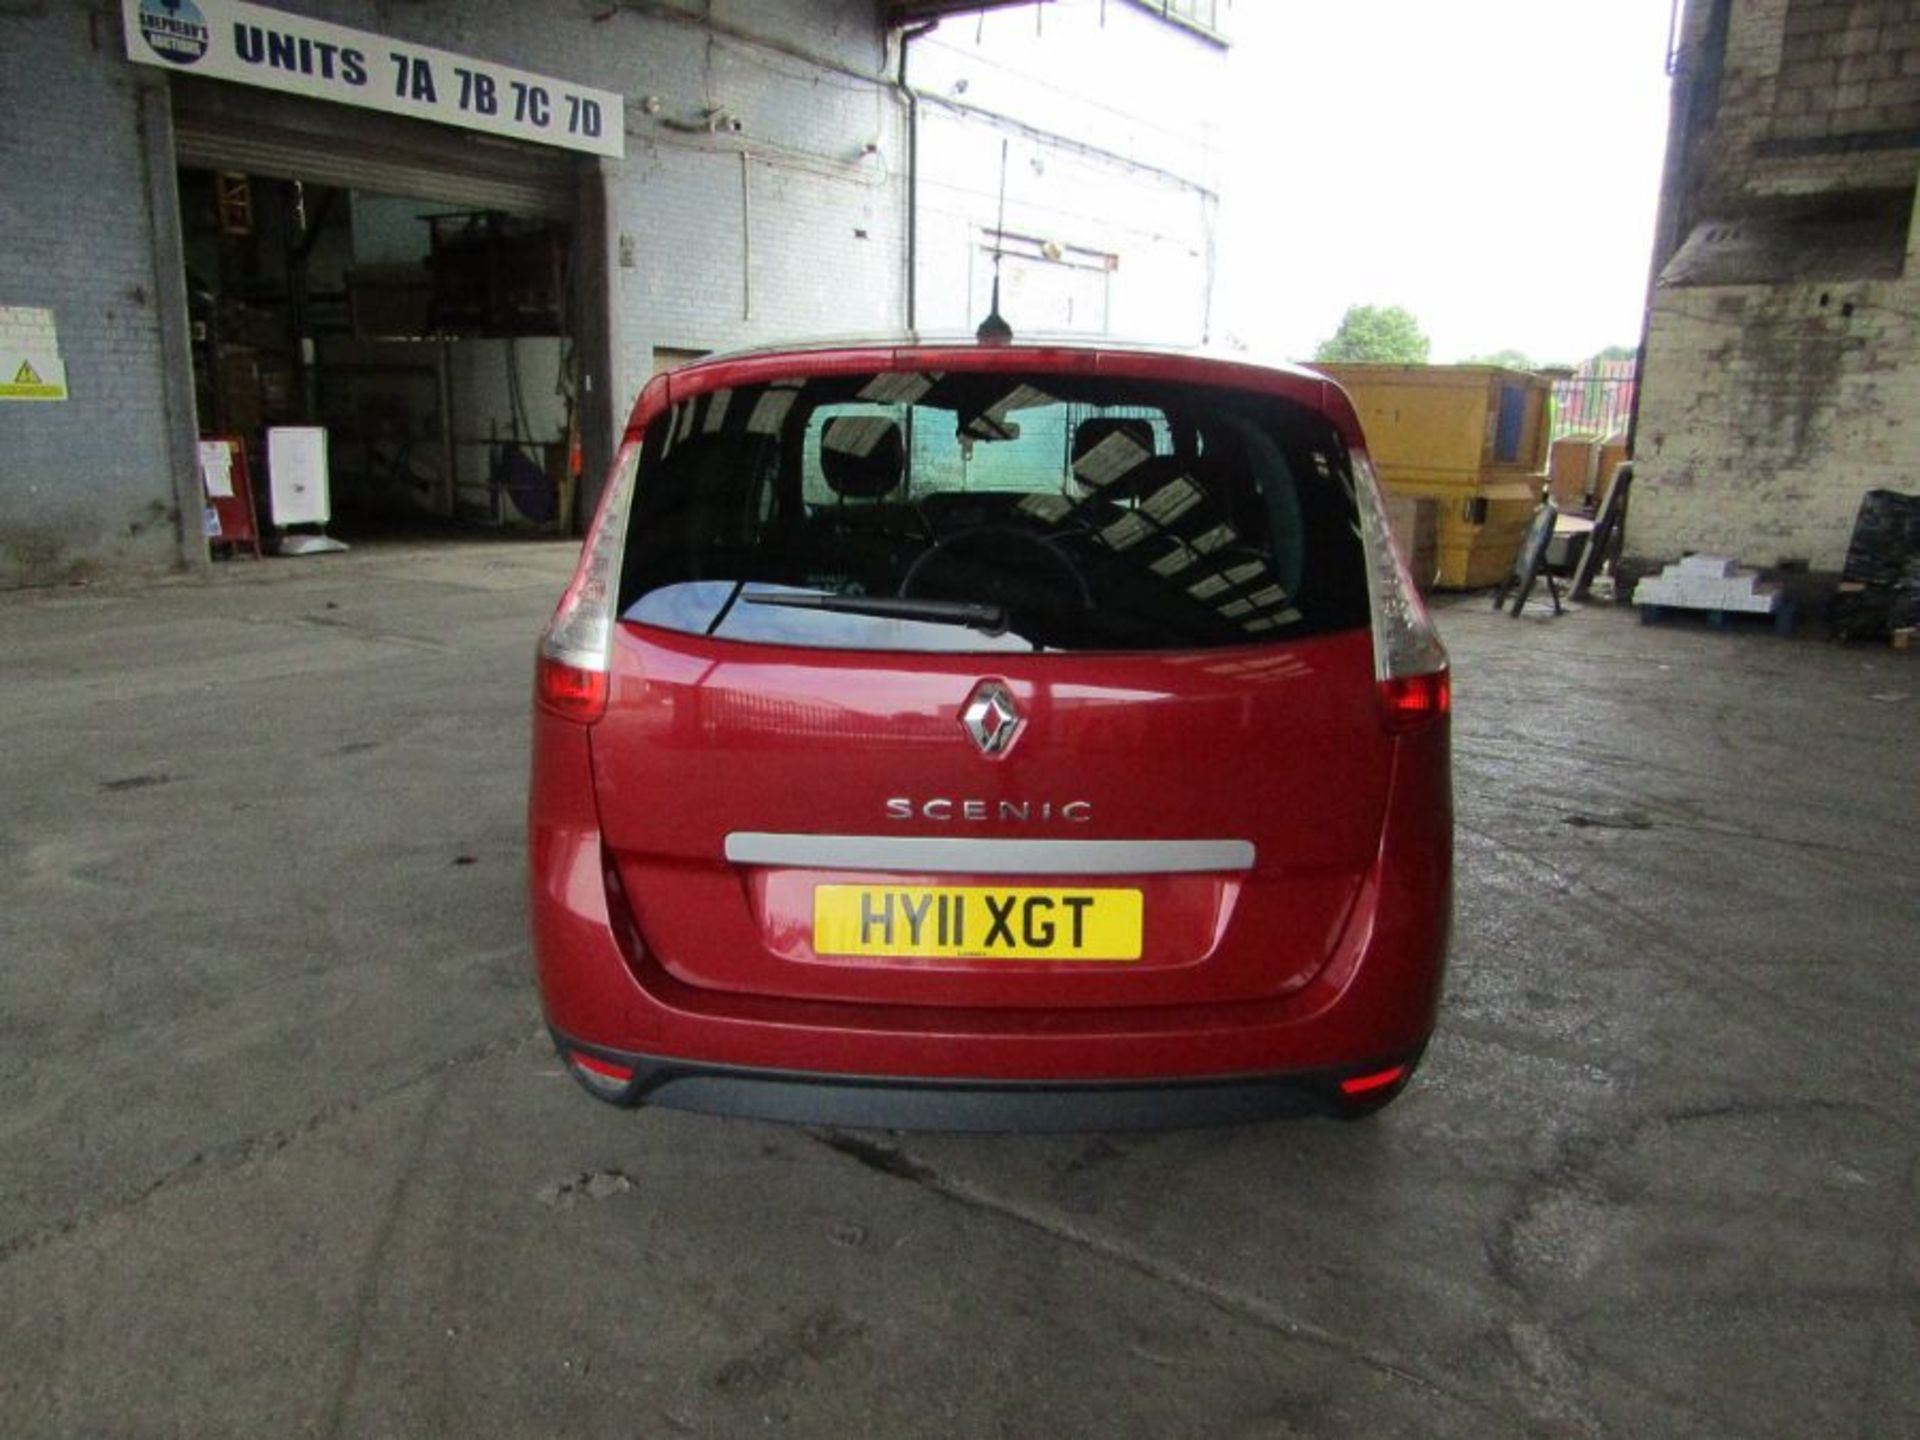 11 Plate Renault Grand Scenic 1.6 VVTi Dynamique Tom Tom 7 seats, CAT N (recorded as such 12/02/ - Image 5 of 42